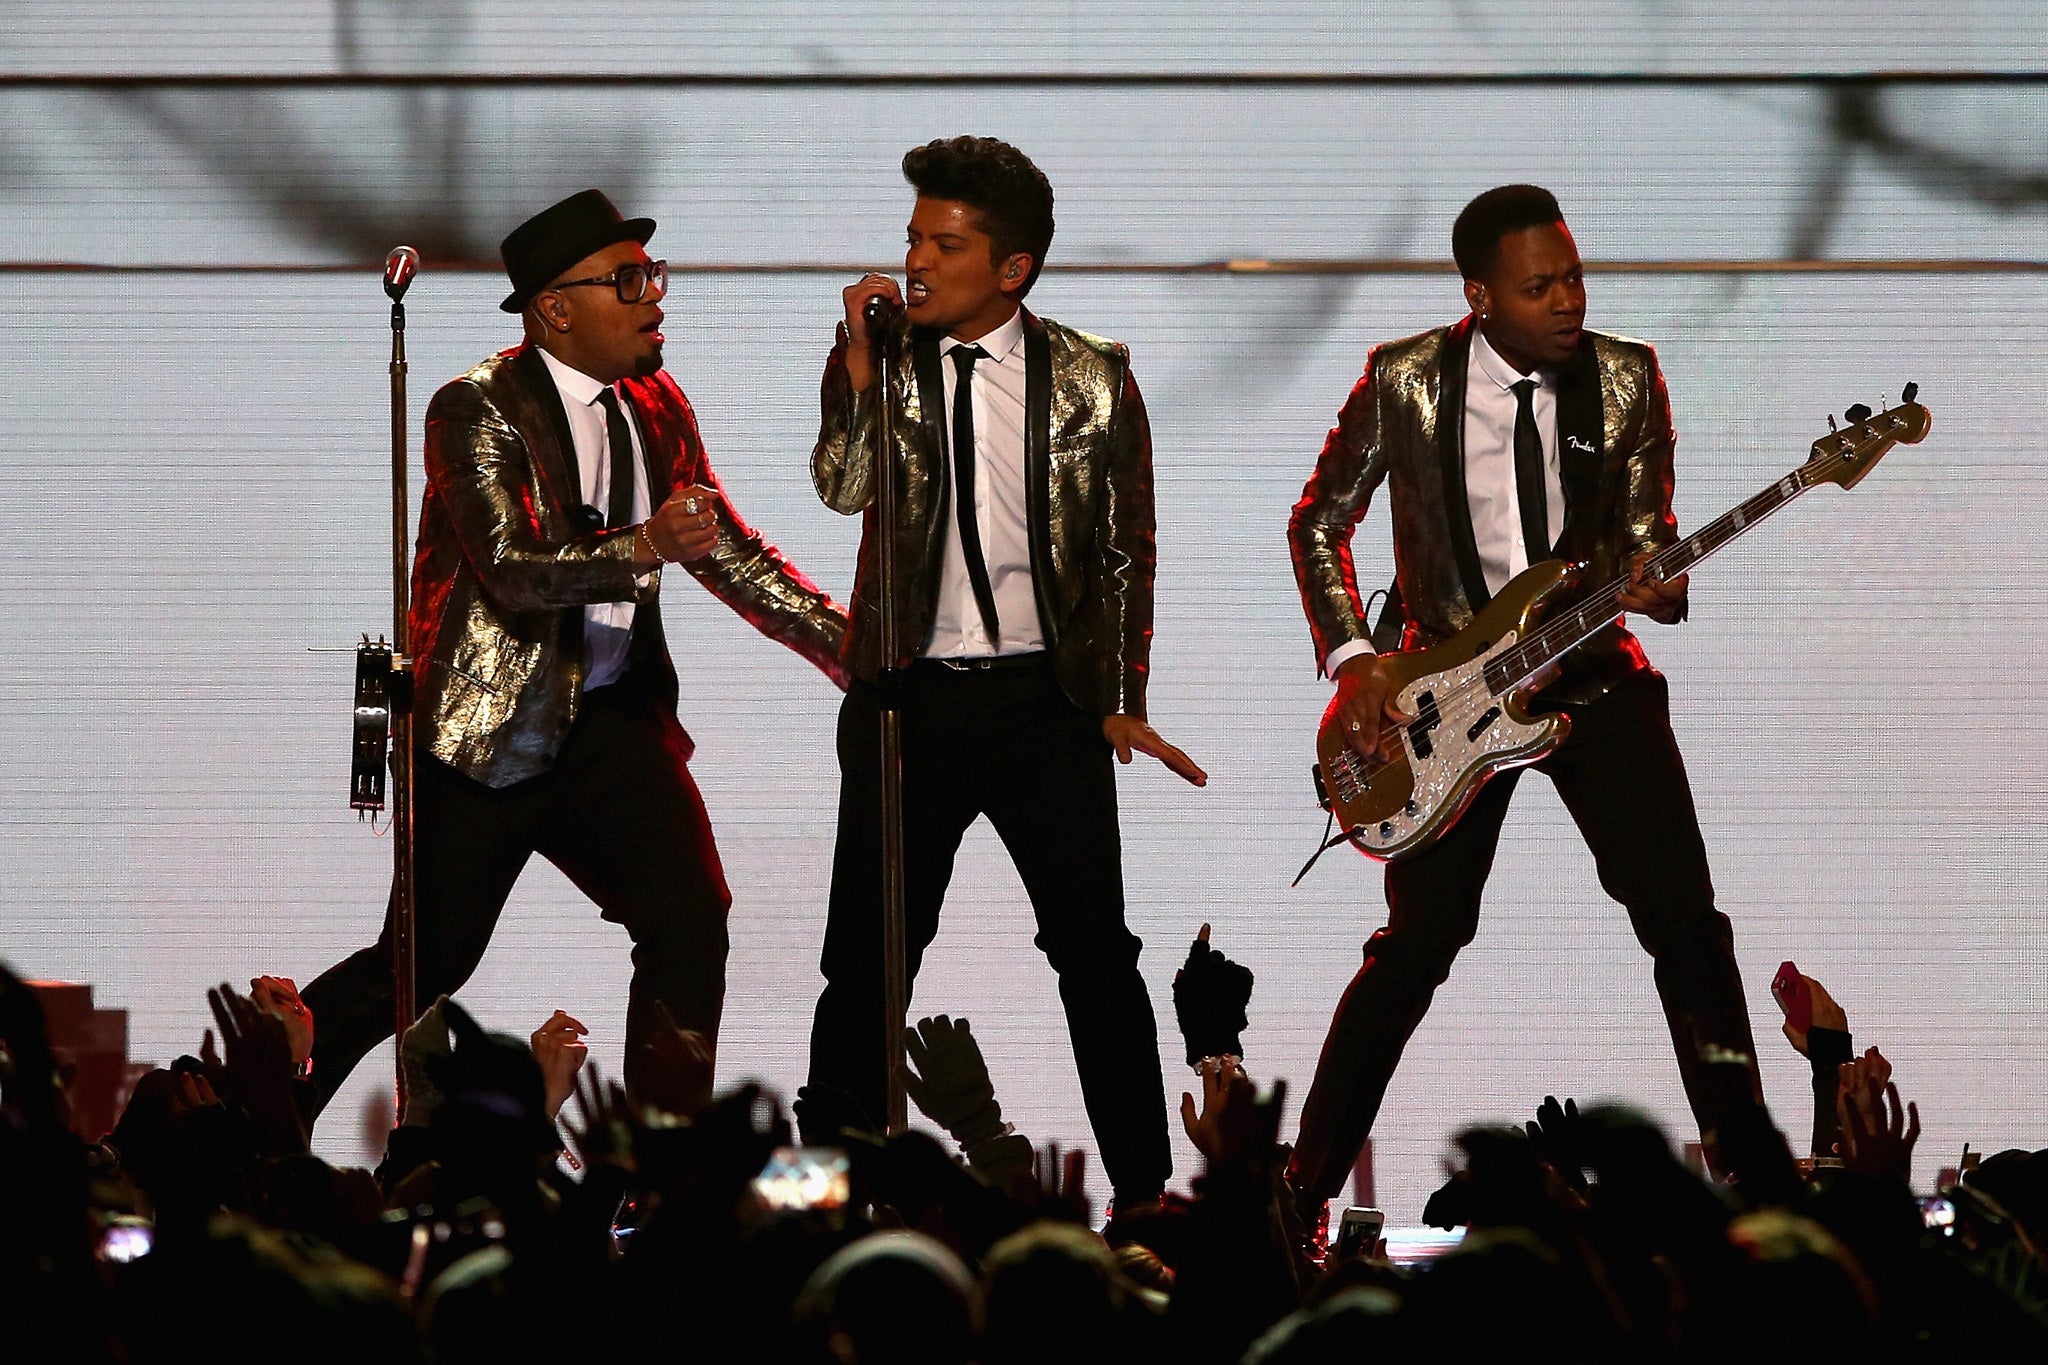 Bruno Mars performs with his backing men during the Super Bowl Halftime show